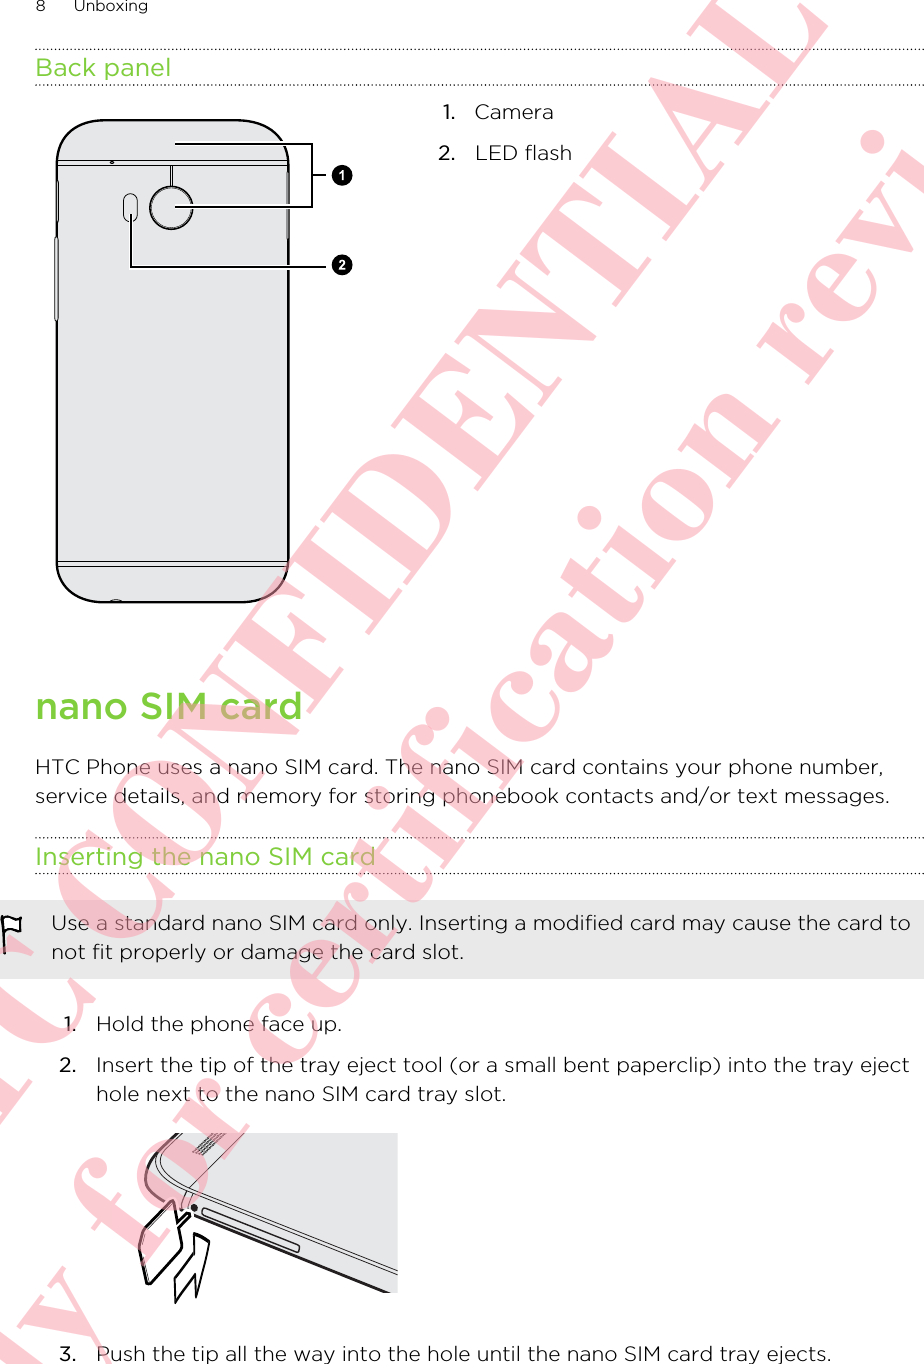 Back panel1.   Camera2. LED flashnano SIM cardHTC Phone uses a nano SIM card. The nano SIM card contains your phone number,service details, and memory for storing phonebook contacts and/or text messages.Inserting the nano SIM cardUse a standard nano SIM card only. Inserting a modified card may cause the card tonot fit properly or damage the card slot.1. Hold the phone face up.2. Insert the tip of the tray eject tool (or a small bent paperclip) into the tray ejecthole next to the nano SIM card tray slot. 3. Push the tip all the way into the hole until the nano SIM card tray ejects.8 Unboxing      HTC CONFIDENTIAL Only for certification review